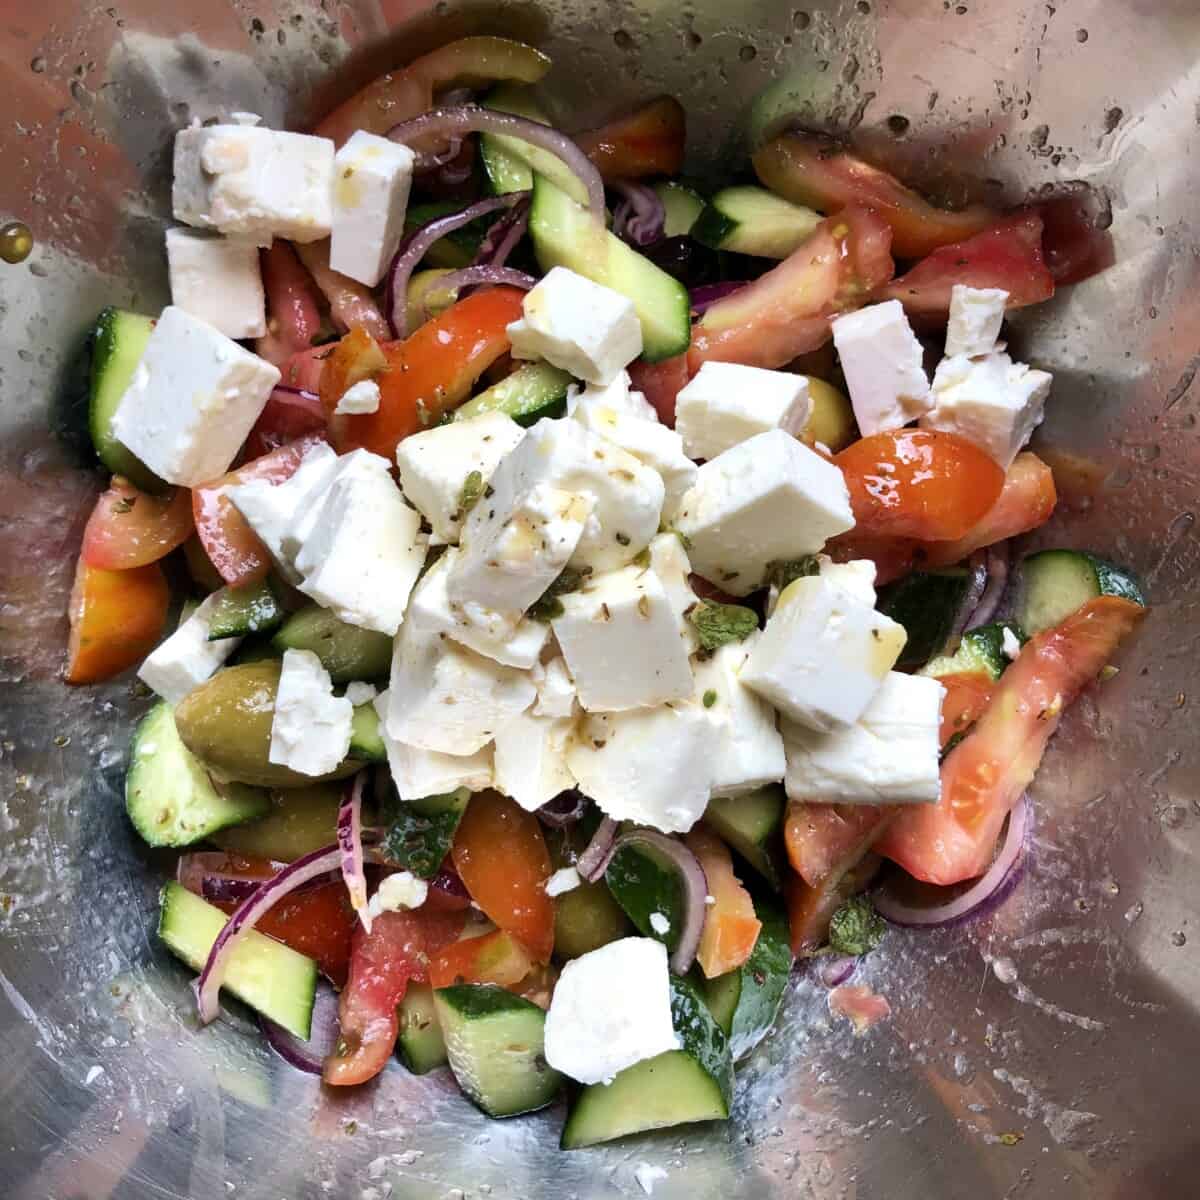 Chopped and sliced veggies with olives in a large mixing bowl tossed with the dressing and topped with feta cheese.